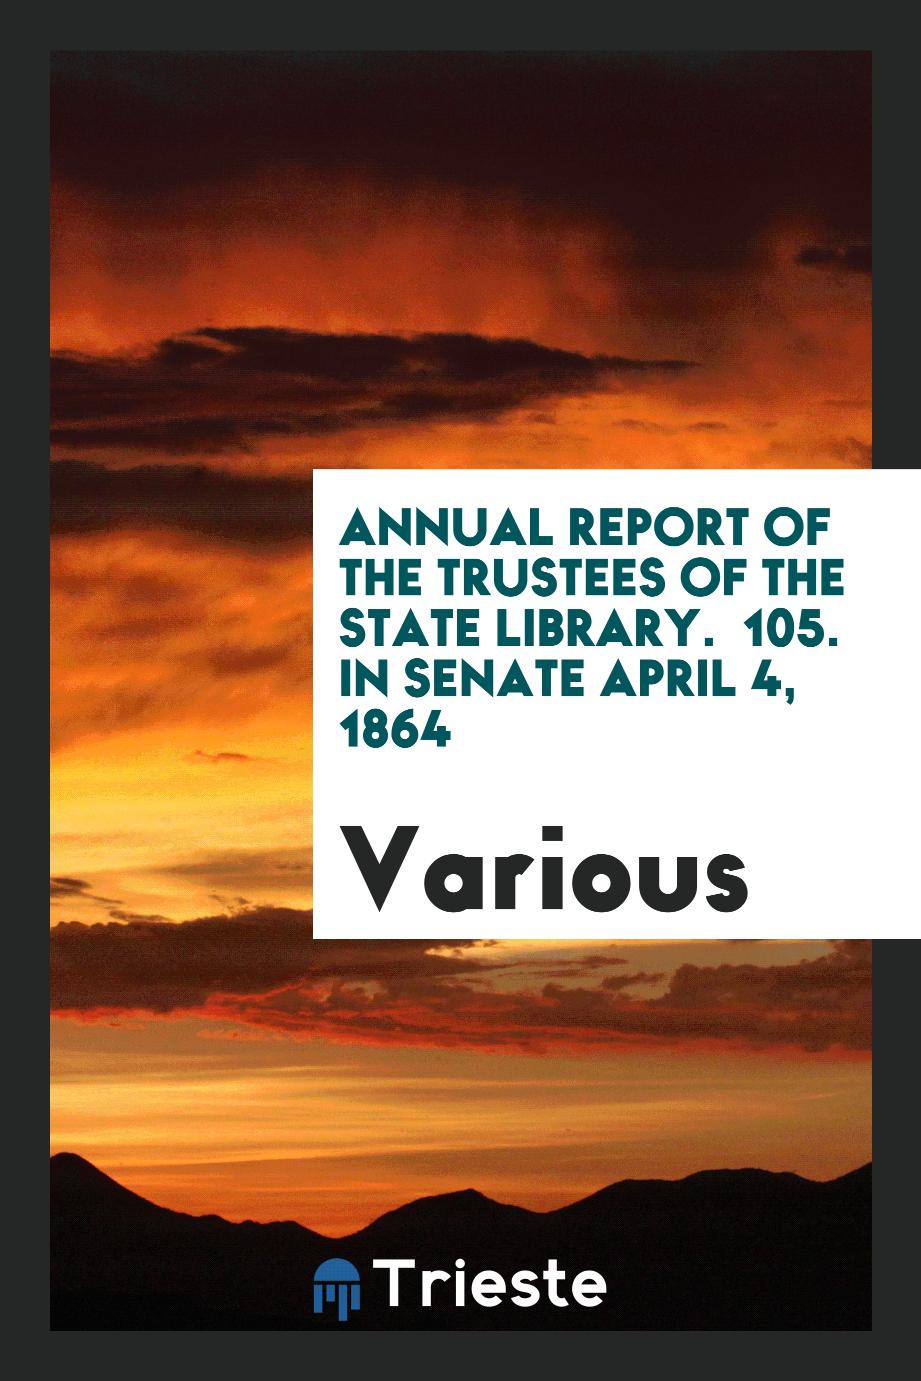 Annual Report of the Trustees of the State Library. № 105. In Senate April 4, 1864